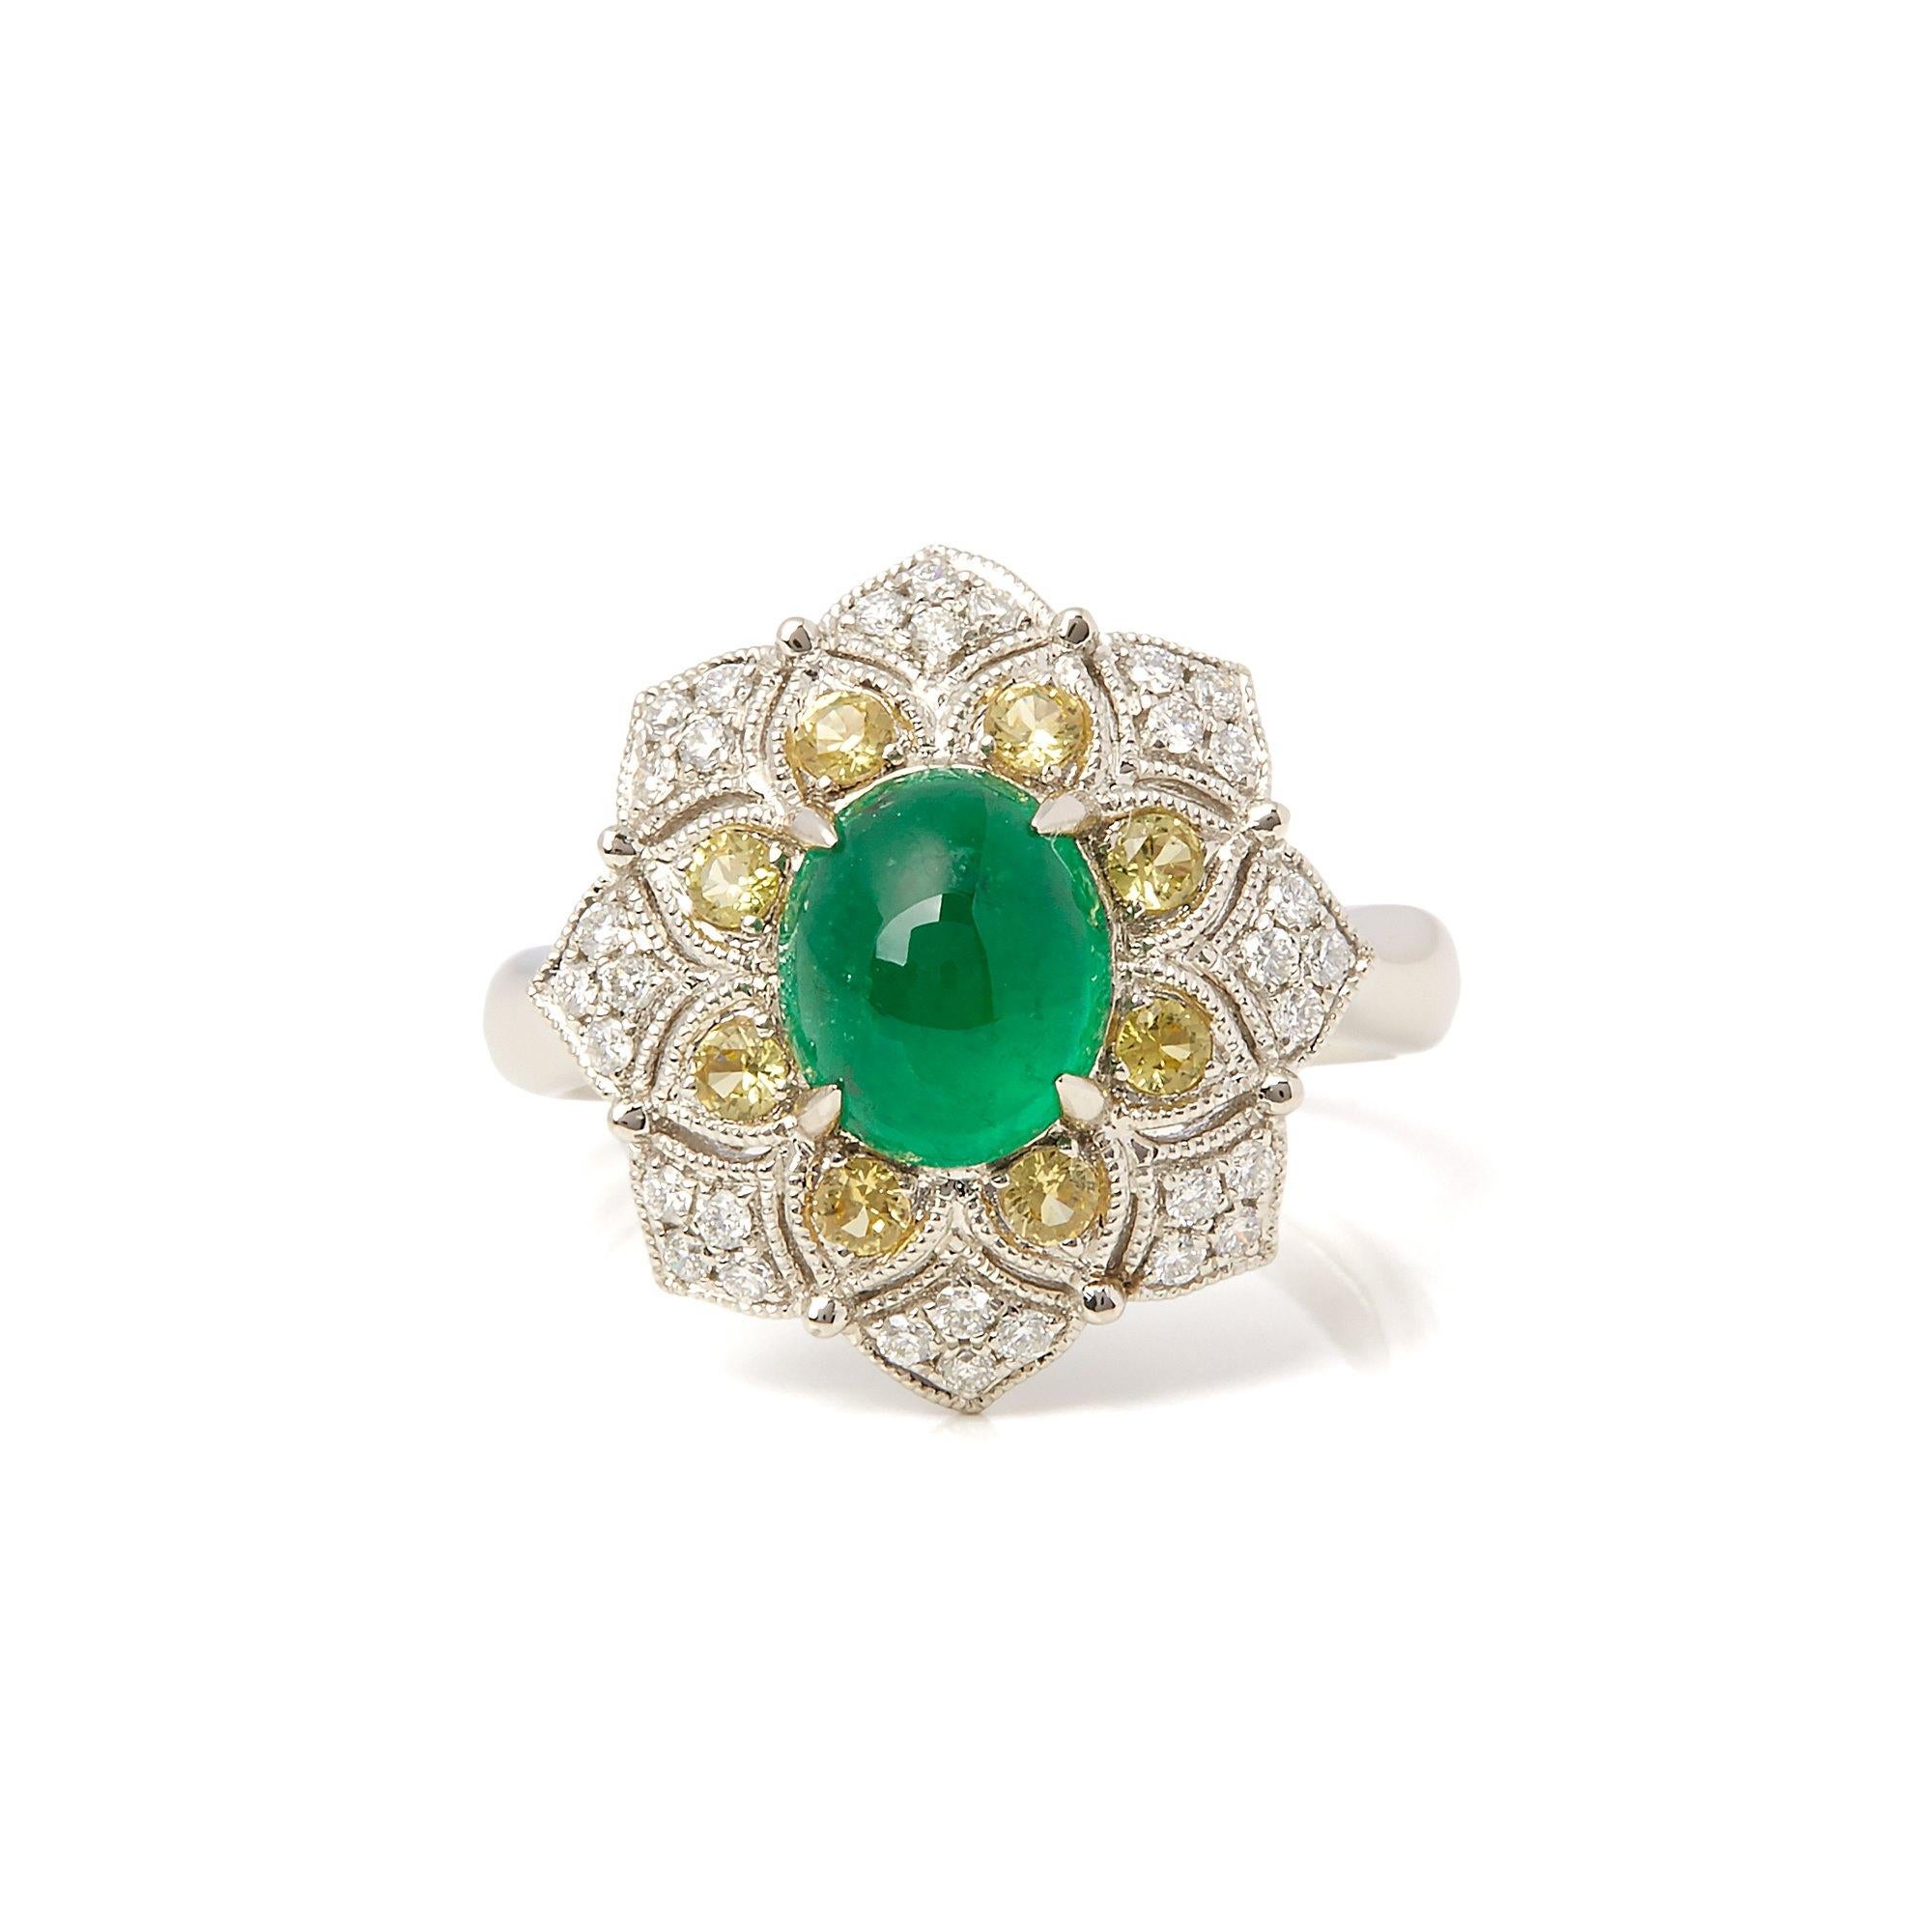 This ring designed by David Jerome is from his private collection and features one cabochon cut Emerald sourced in the chivor mine in Columbia. Totalling 2.16cts set with round brilliant cut Diamonds and yellow Sapphires totalling 0.32cts. Mounted